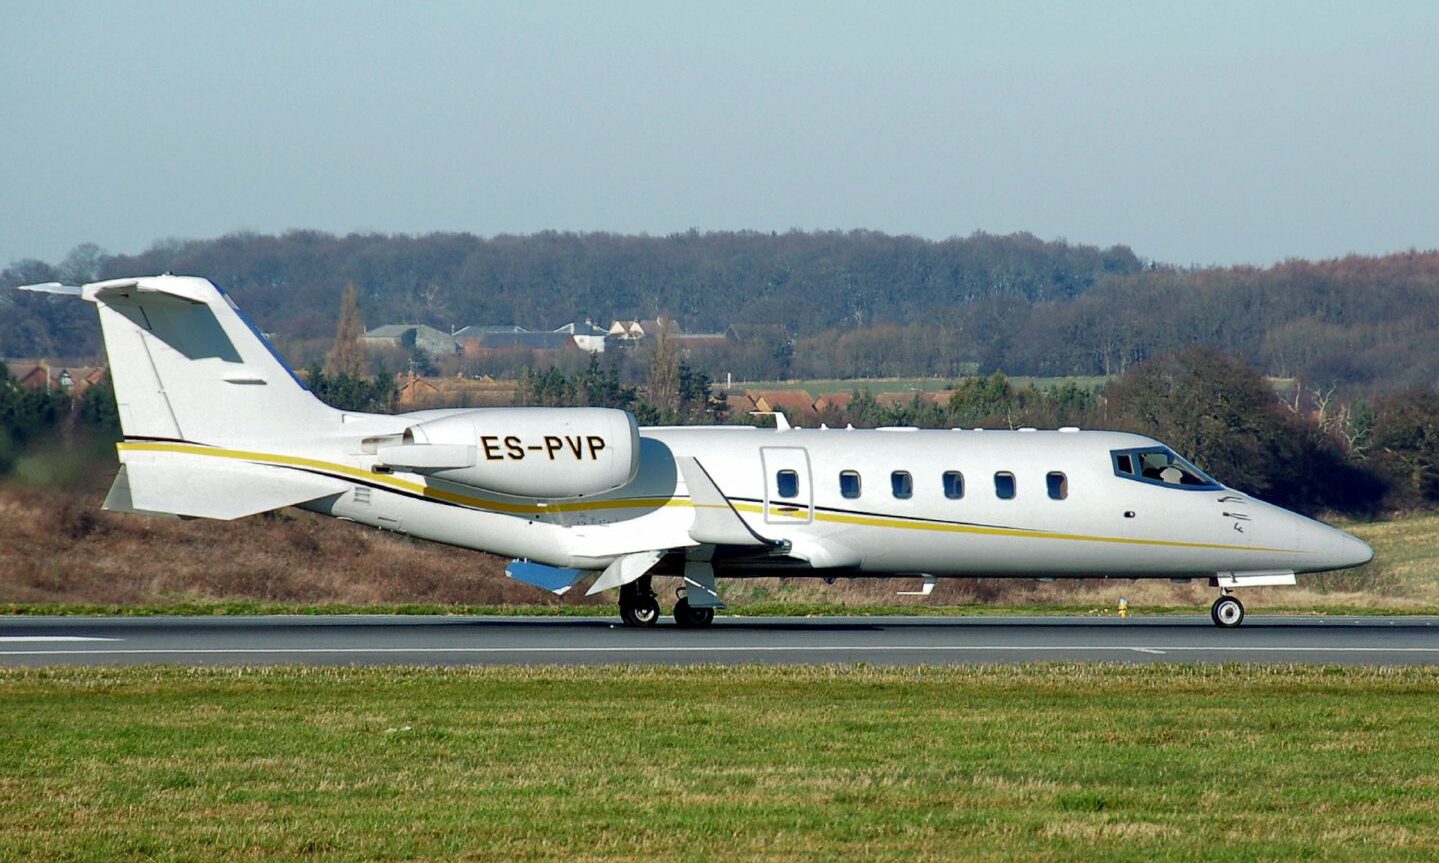 The private jet which took off from Inverness bound for Moscow despite a ban